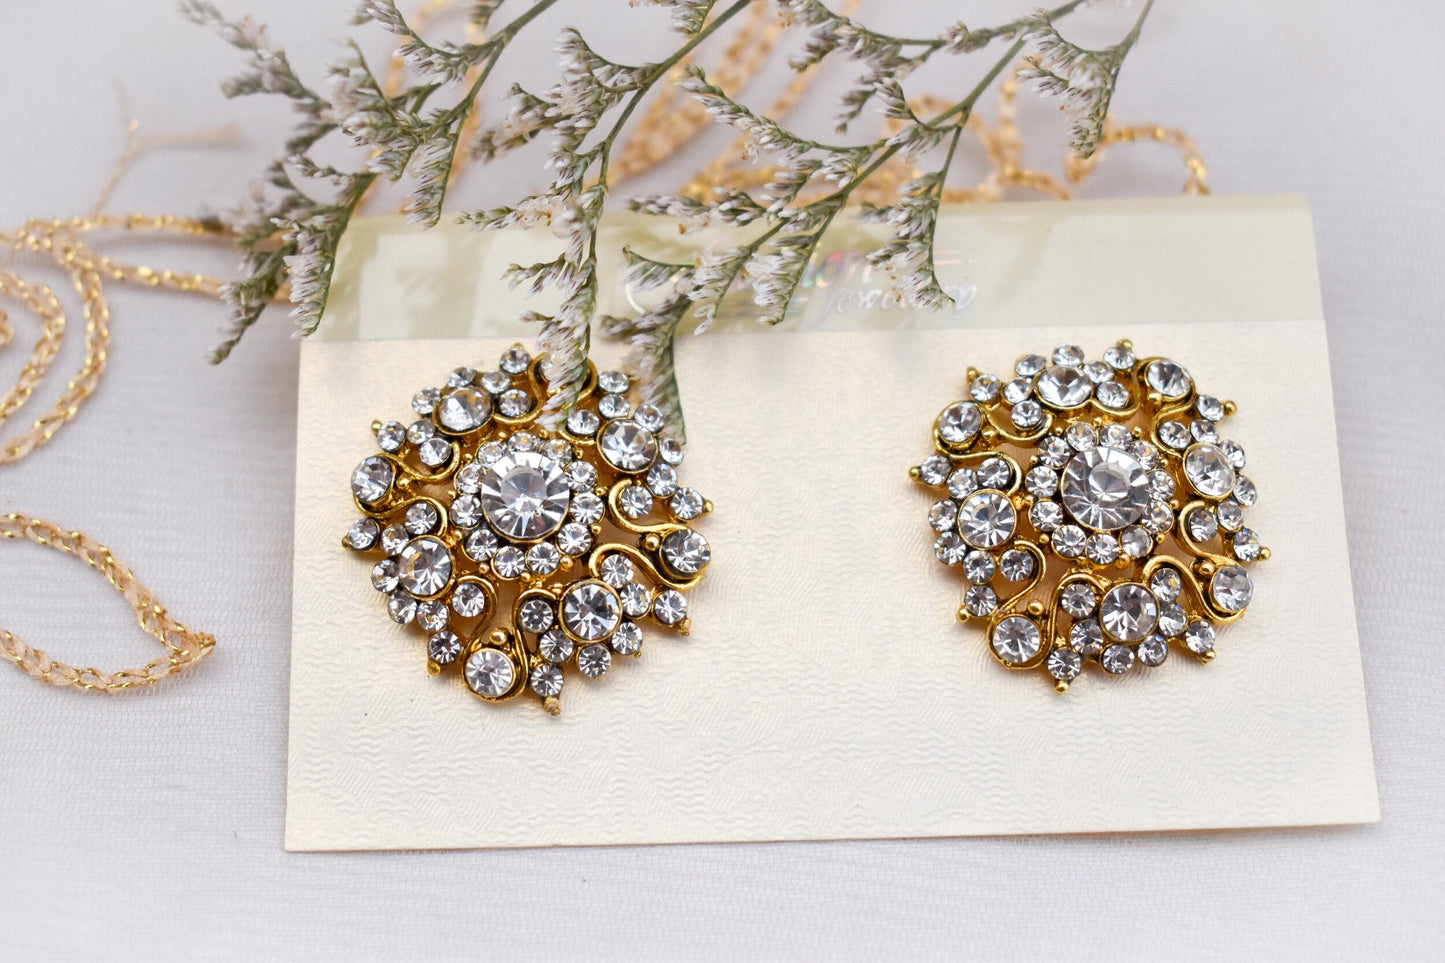 ‘Bloom’ Silver and Gold Stud Earrings